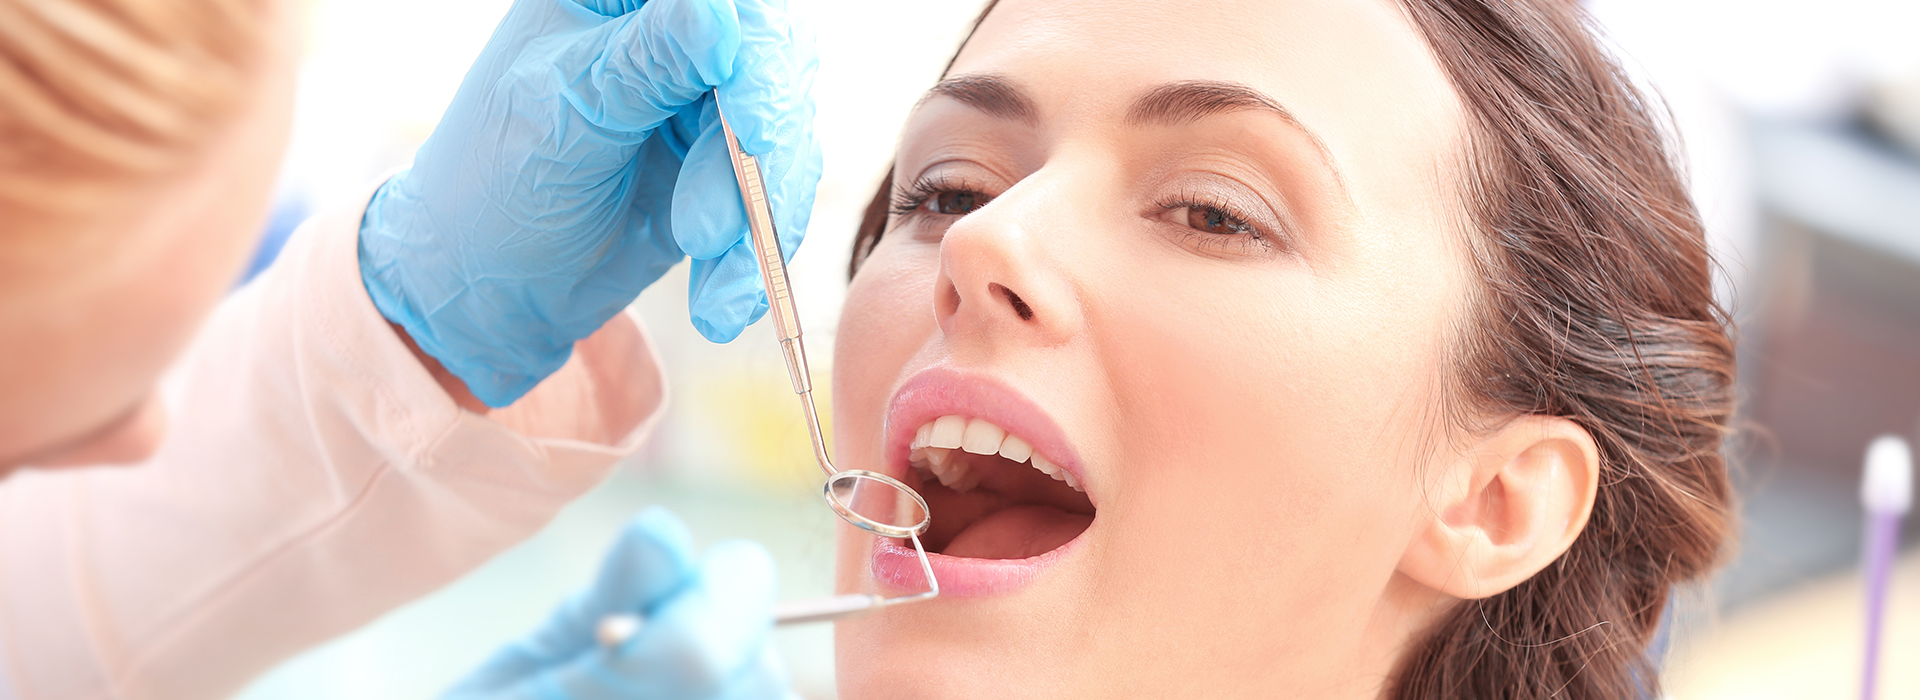 Advanced Dental Care | Pediatric Dentistry, Oral Cancer Screening and Cosmetic Dentistry